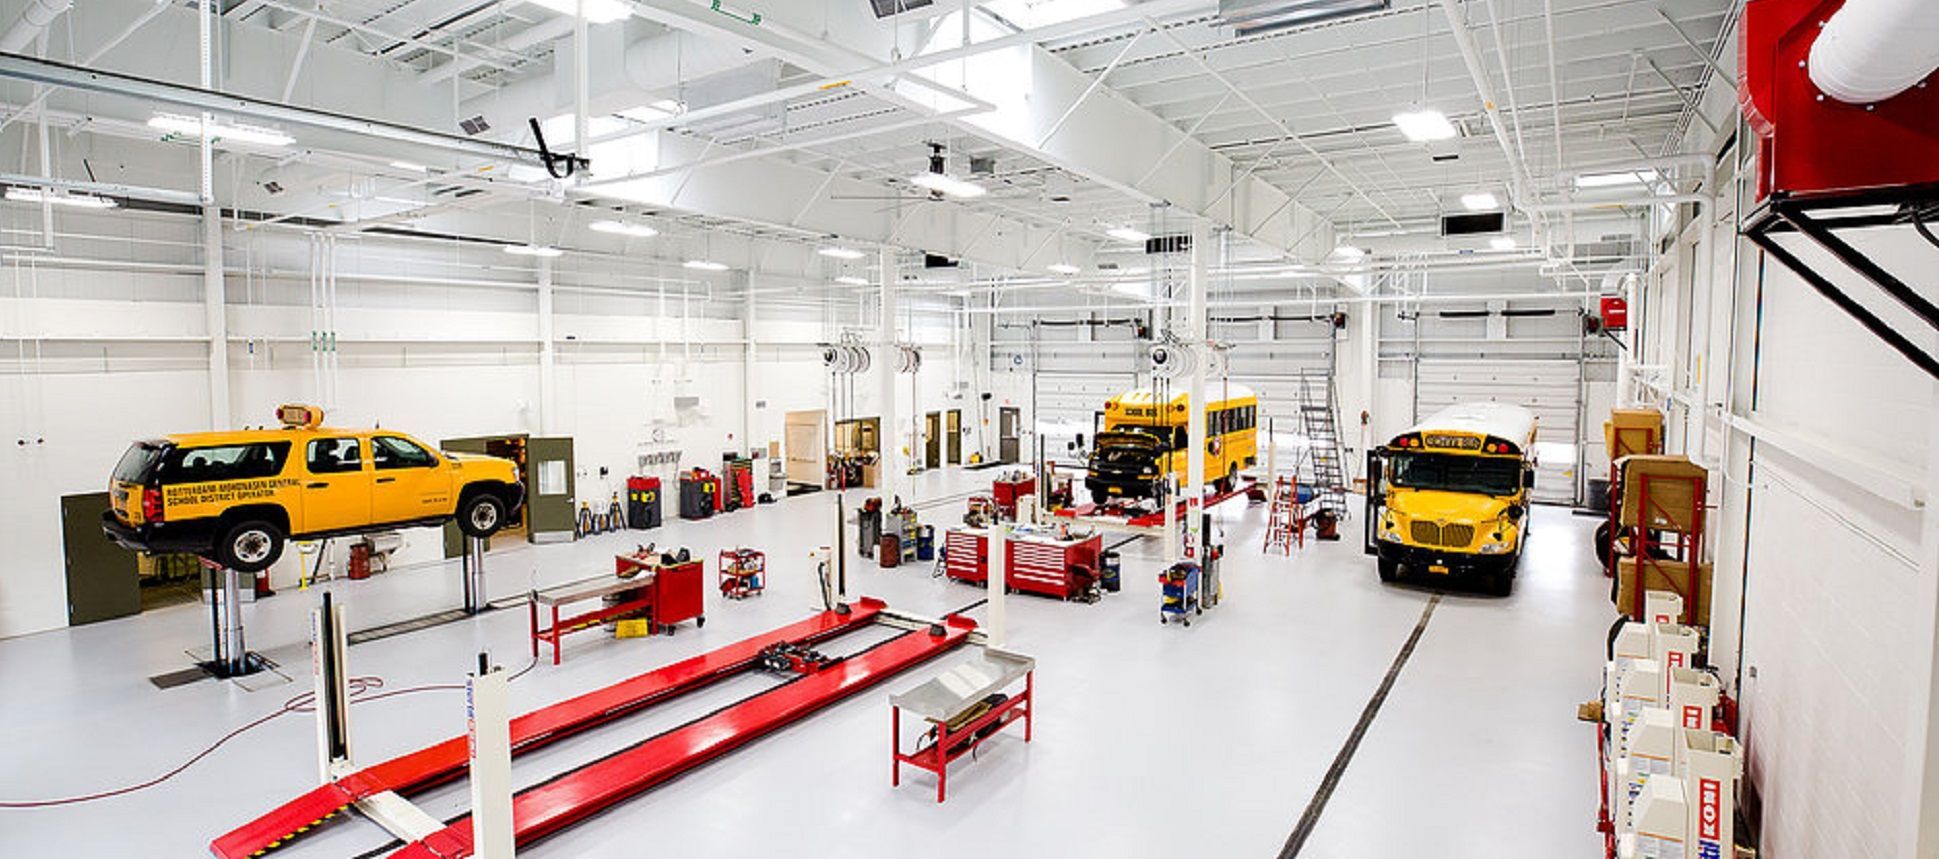 This fresh new school maintenance facility is outfitted with Stertil-Koni DIAMONDLIFTs, platform SKYLIFTs and Mobile Column Lifts